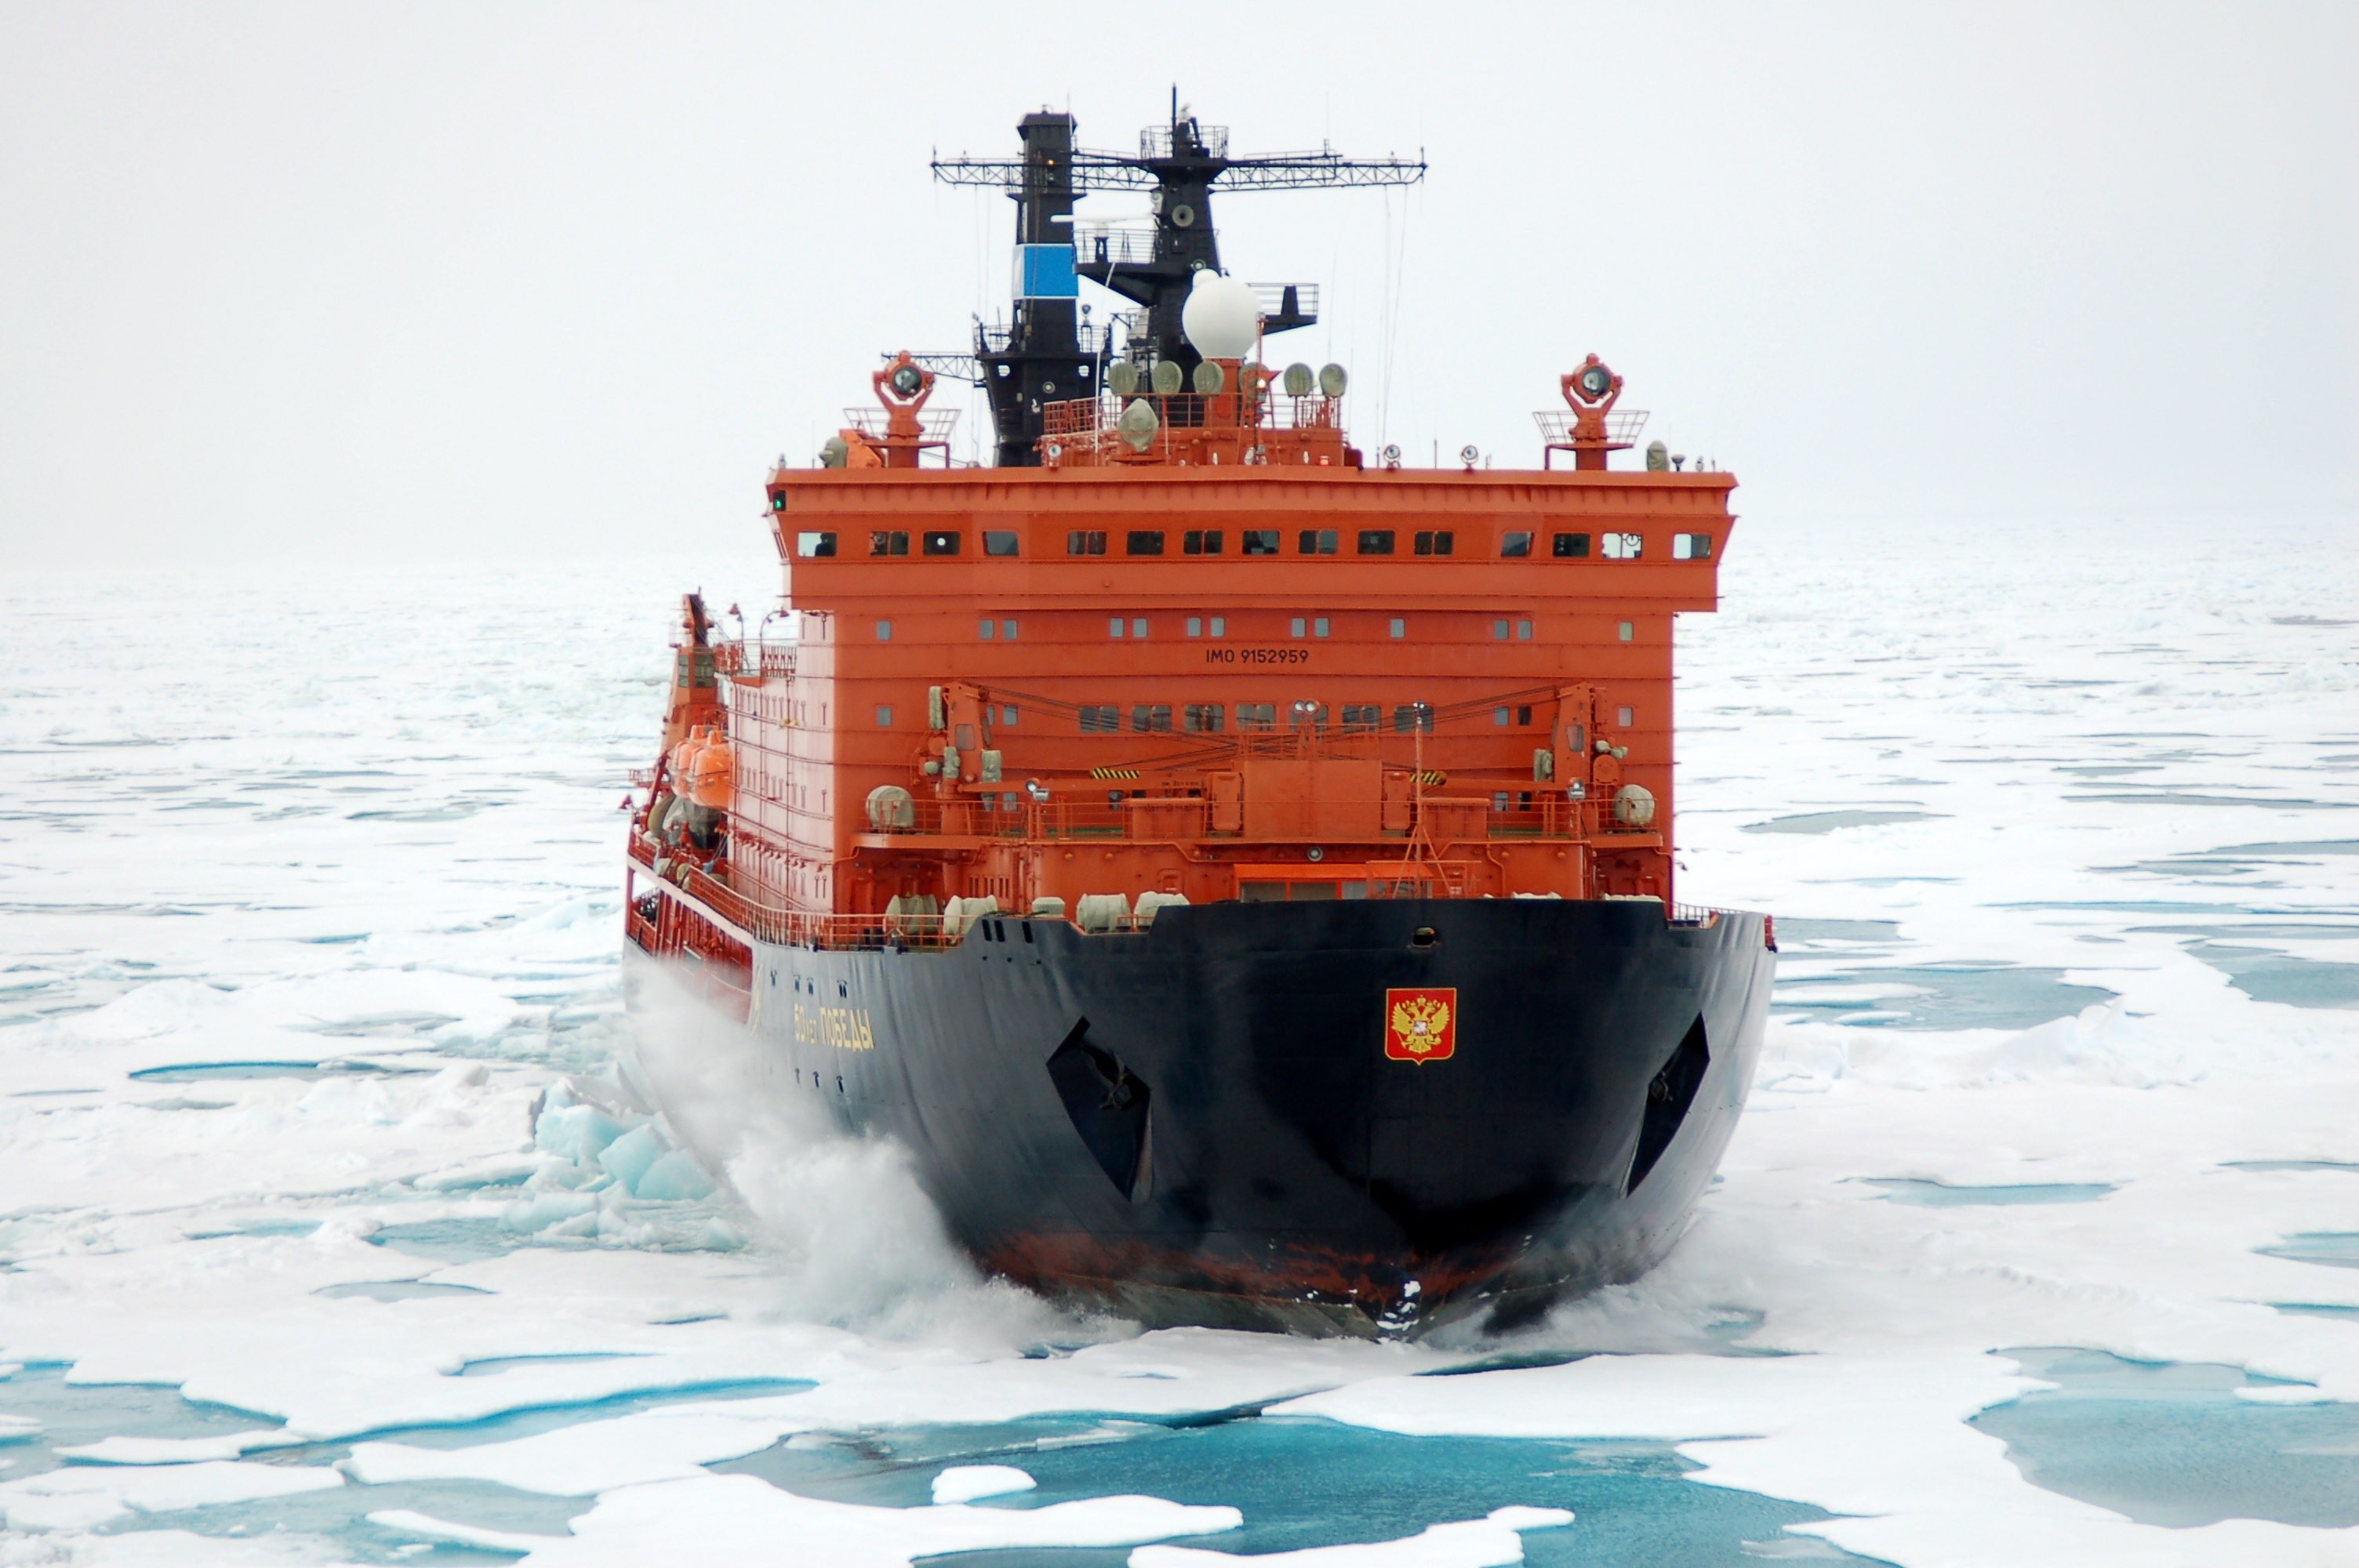 50 Years of Victory powers her way through thick, multi-year sea ice en route to the North Pole.